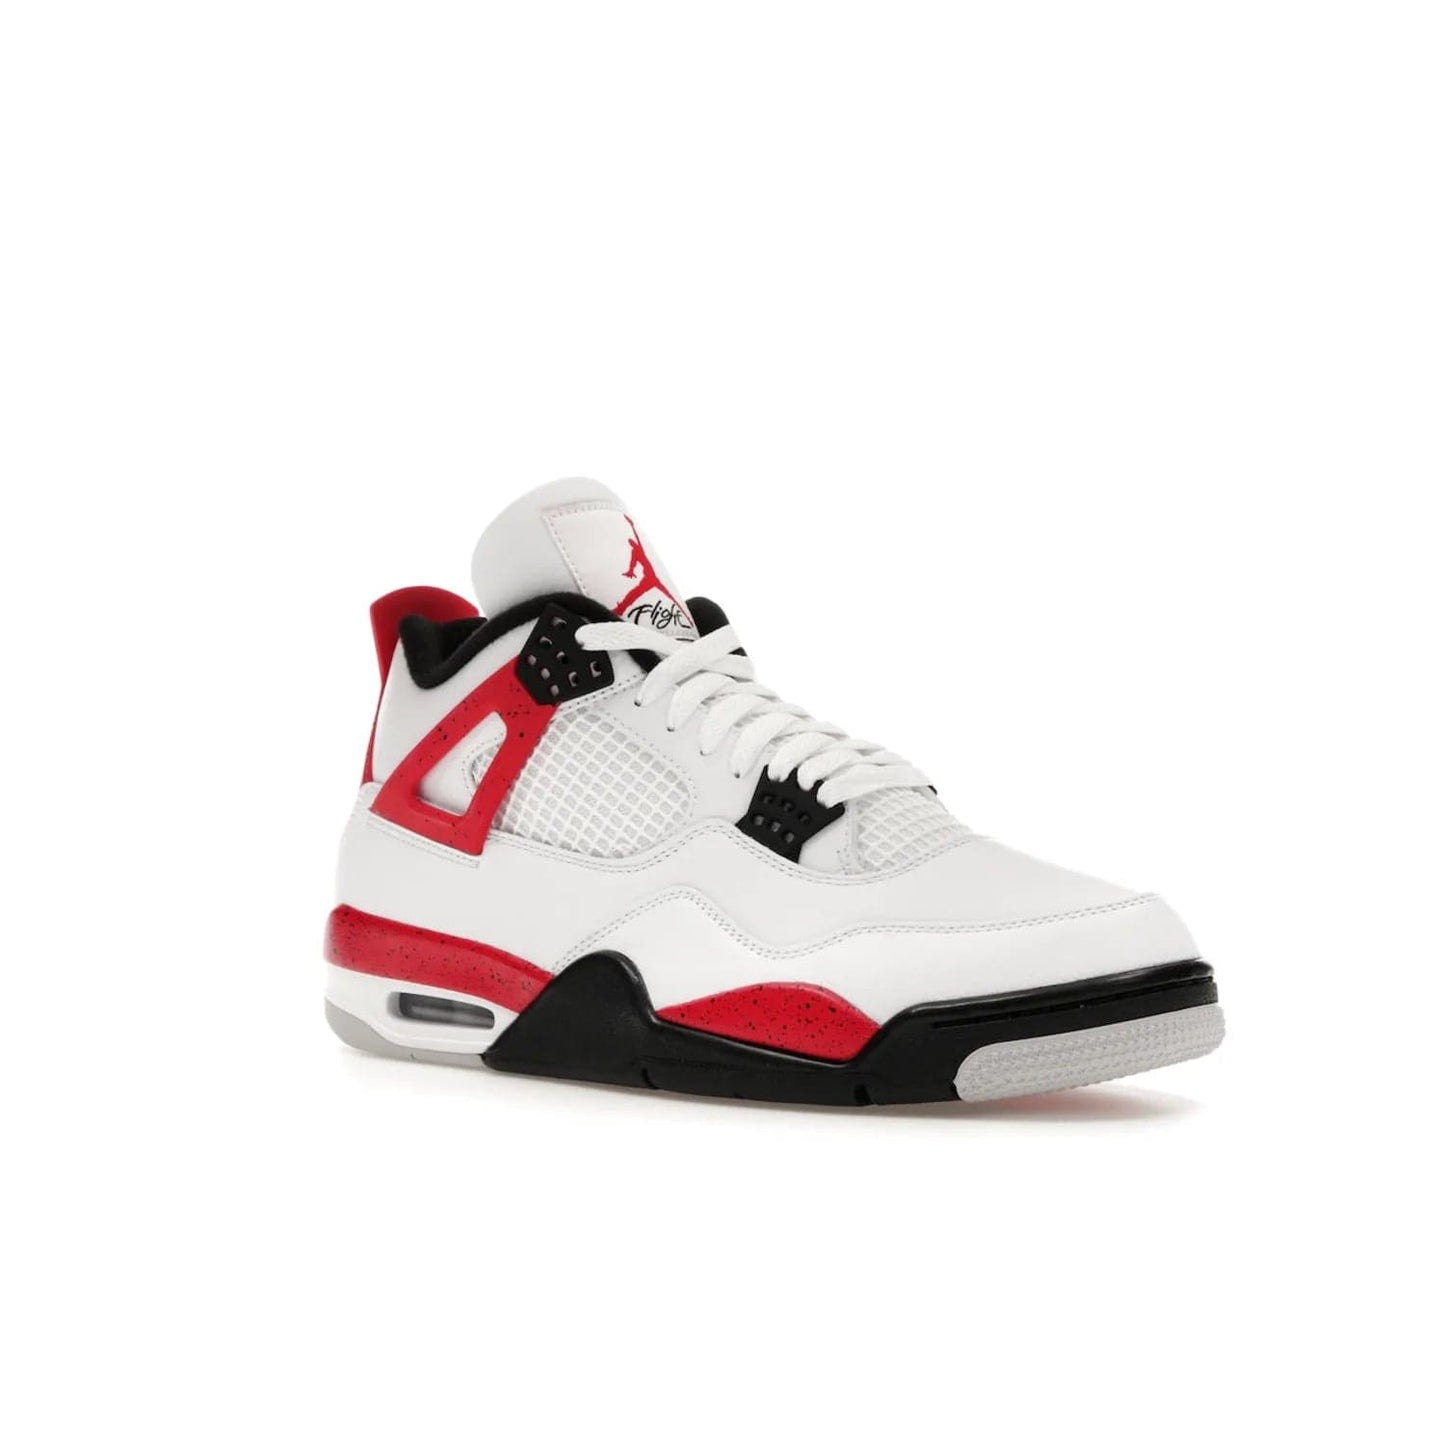 Jordan 4 Retro Red Cement - Image 5 - Only at www.BallersClubKickz.com - Iconic Jordan silhouette with a unique twist. White premium leather uppers with fire red and black detailing. Black, white, and fire red midsole with mesh detailing and Jumpman logo. Jordan 4 Retro Red Cement released with premium price.